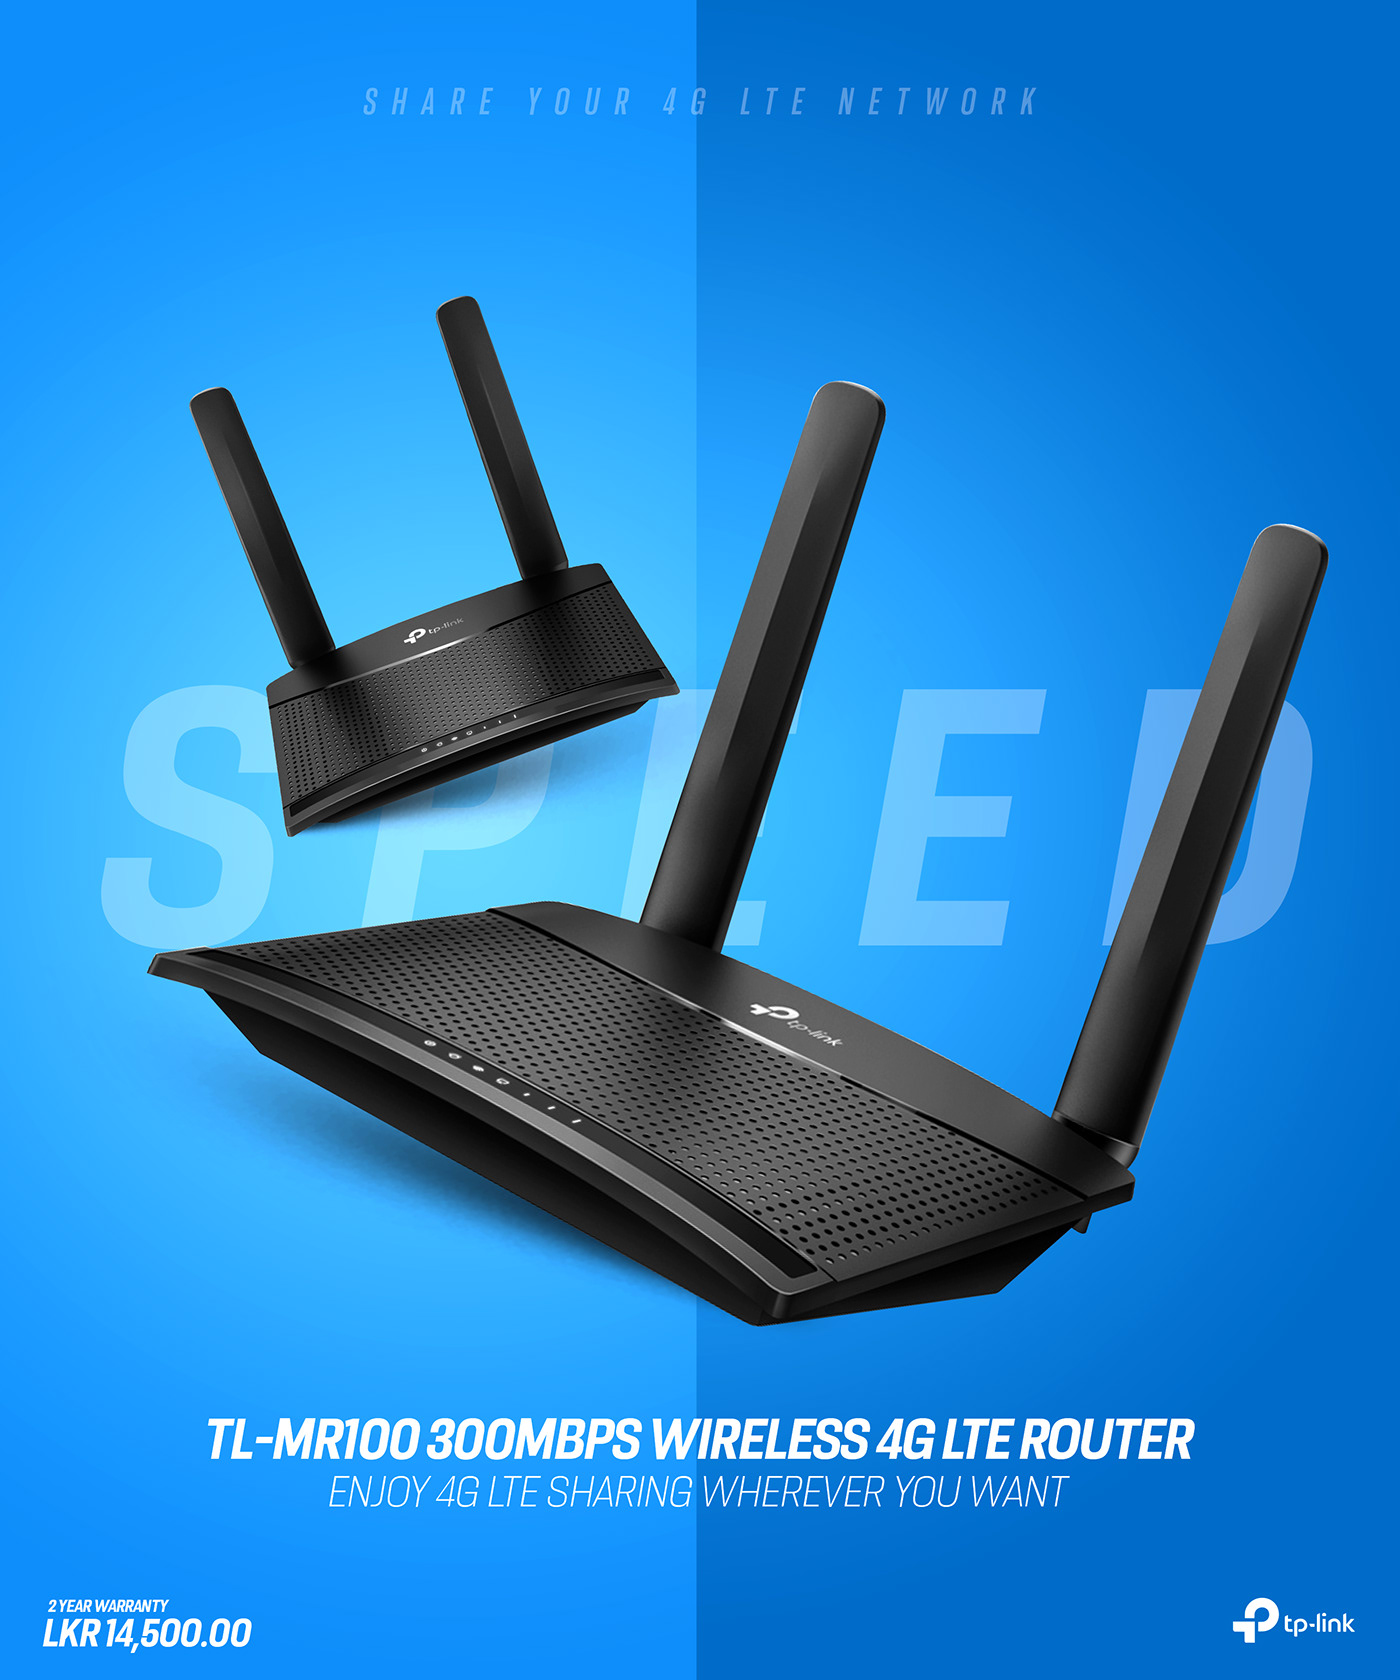 4g speed network new Powerful Router tl-mr100 tplink wireless